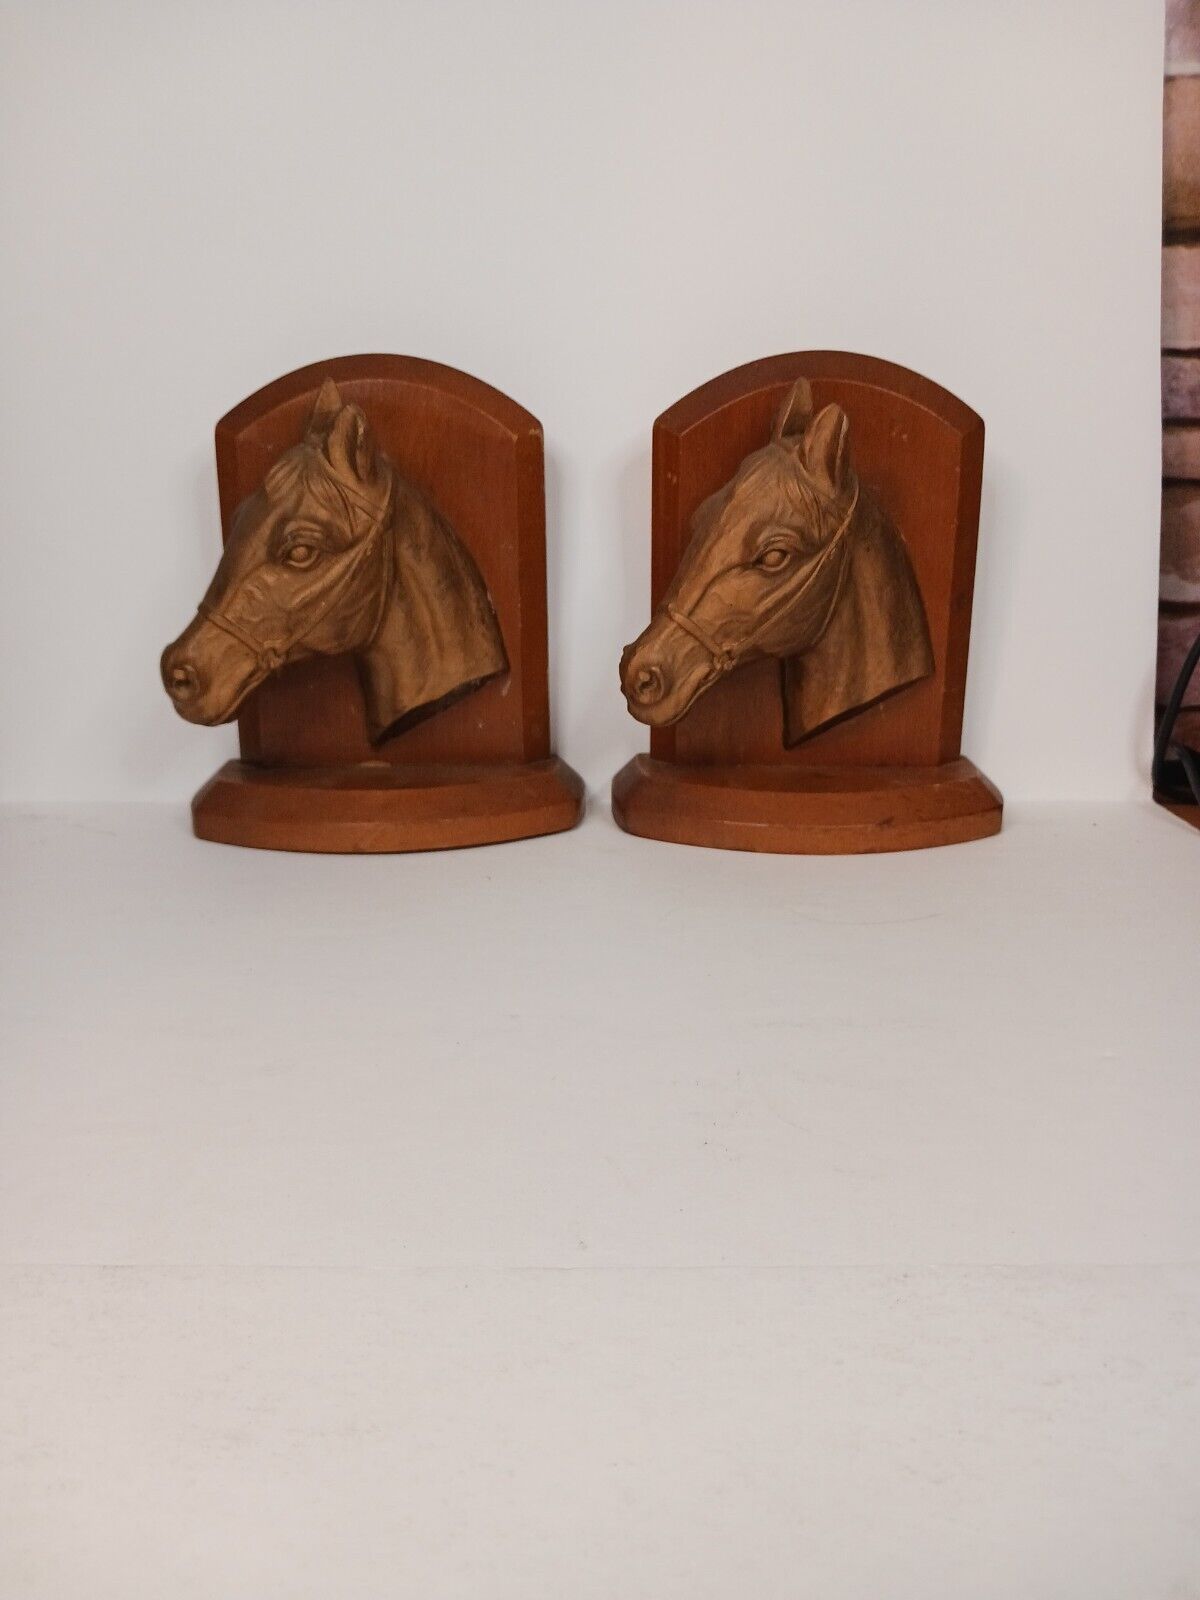 Vintage Syroco Wood Horse Bookends Made In USA Syracuse New York 